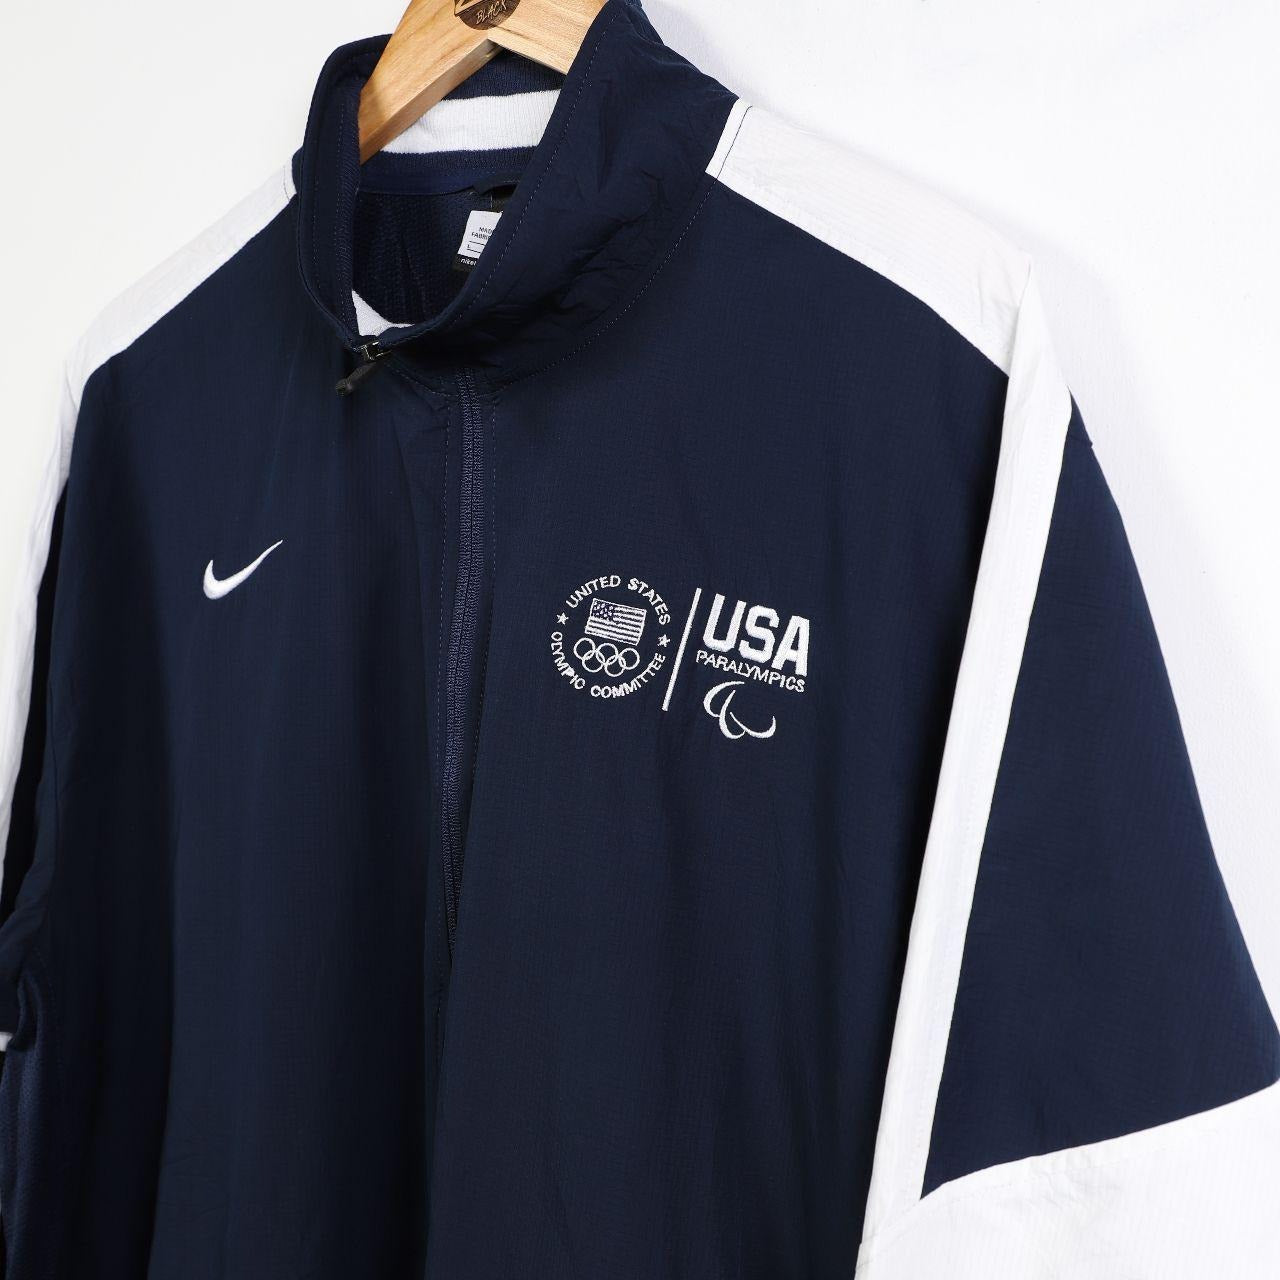 Nike U.S.A Paralympic Olympic Committee Team Jacket – Vintage